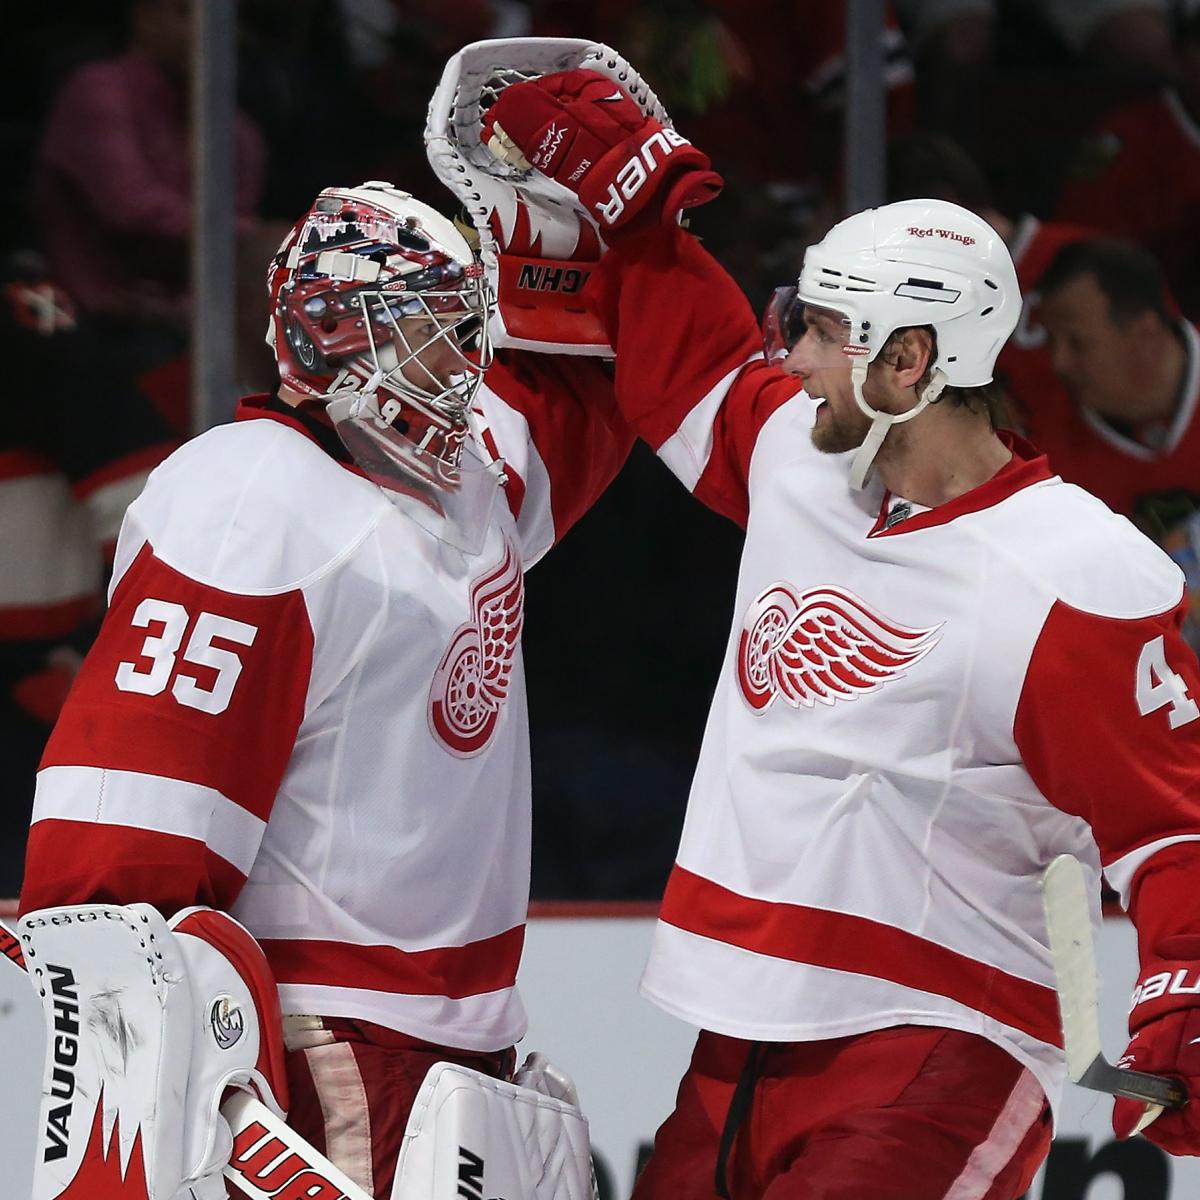 Detroit Red Wings' 5 Most Impressive Players During 2013 Playoffs